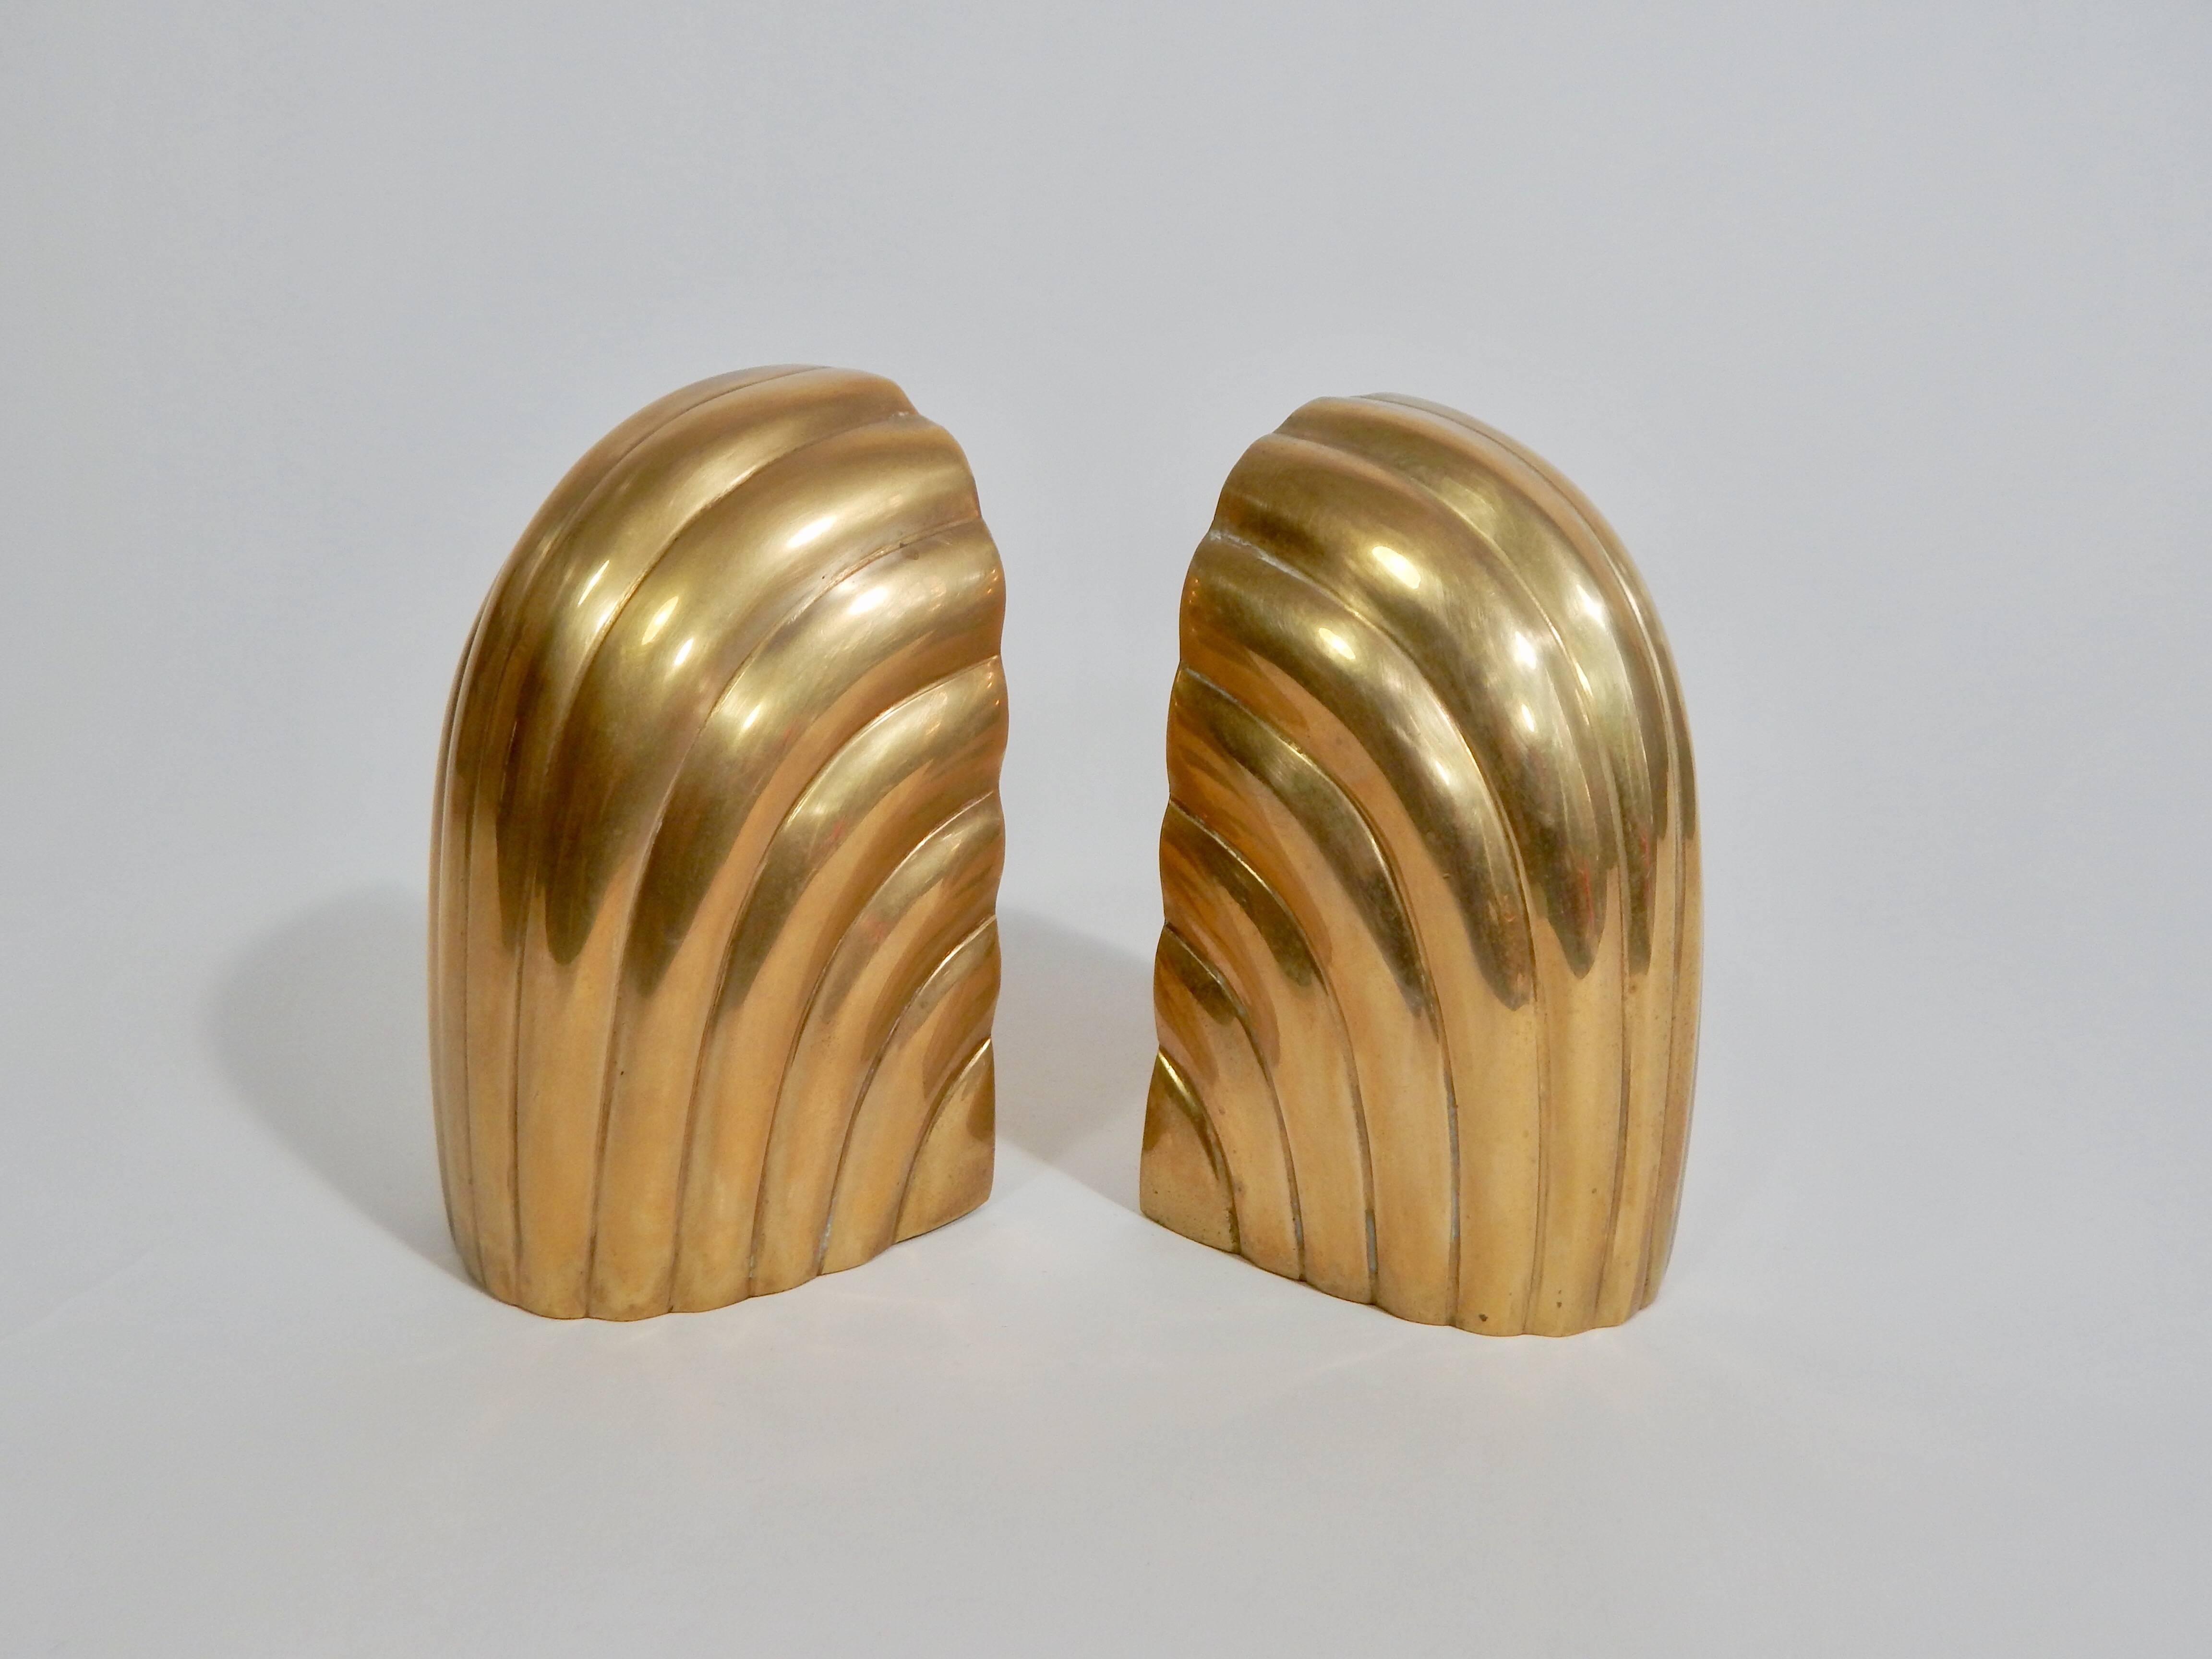 20th Century Pair of Solid Brass Bookends